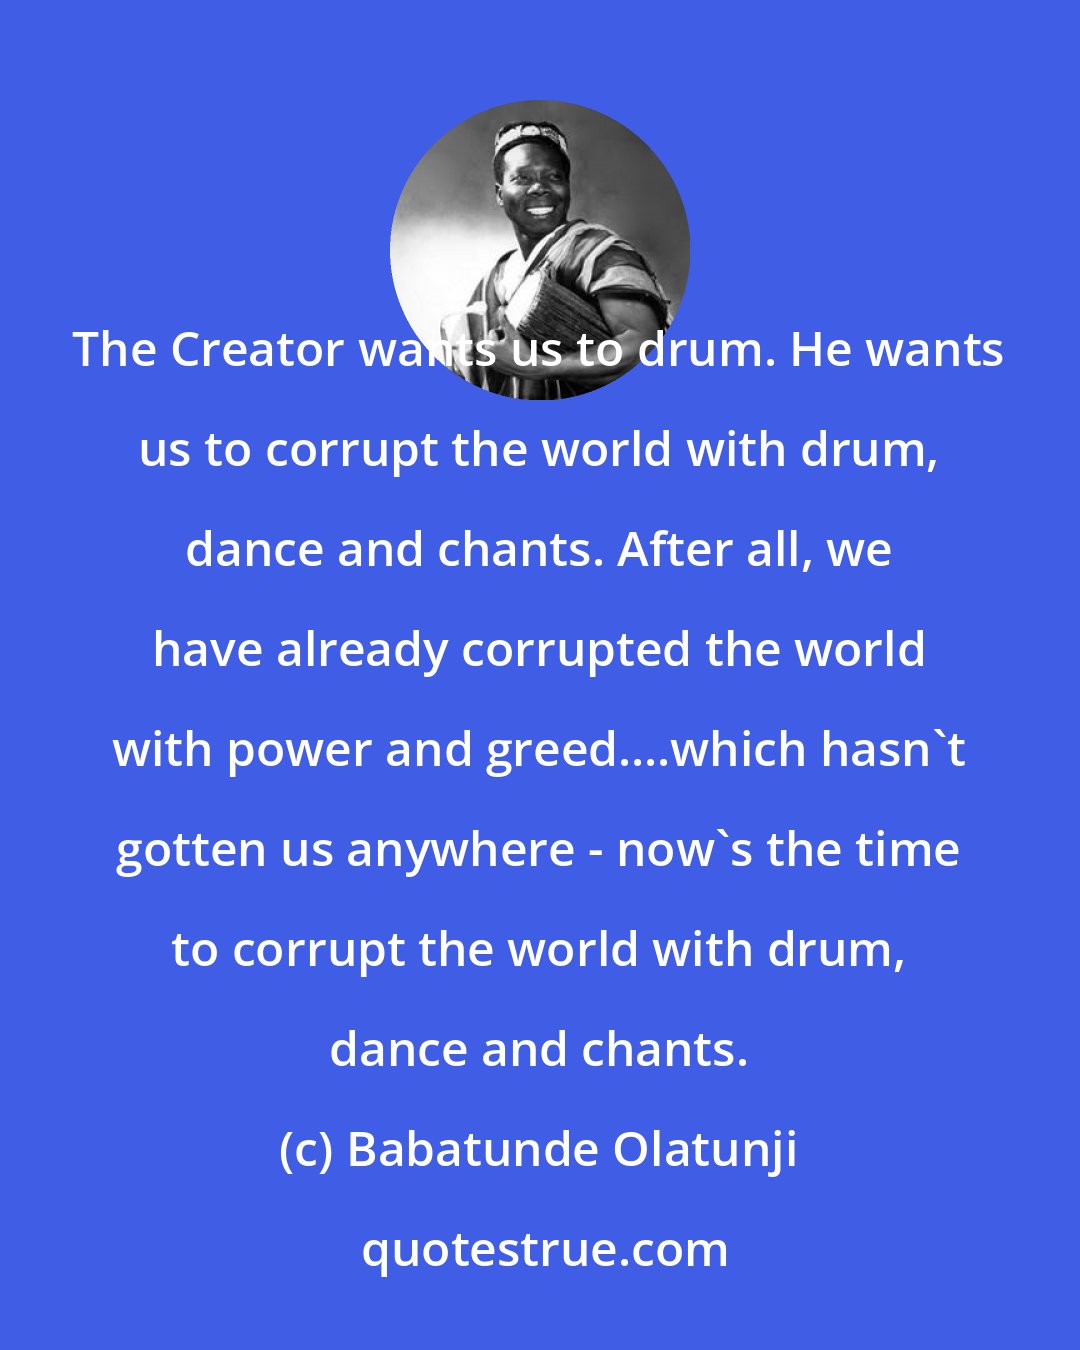 Babatunde Olatunji: The Creator wants us to drum. He wants us to corrupt the world with drum, dance and chants. After all, we have already corrupted the world with power and greed....which hasn't gotten us anywhere - now's the time to corrupt the world with drum, dance and chants.